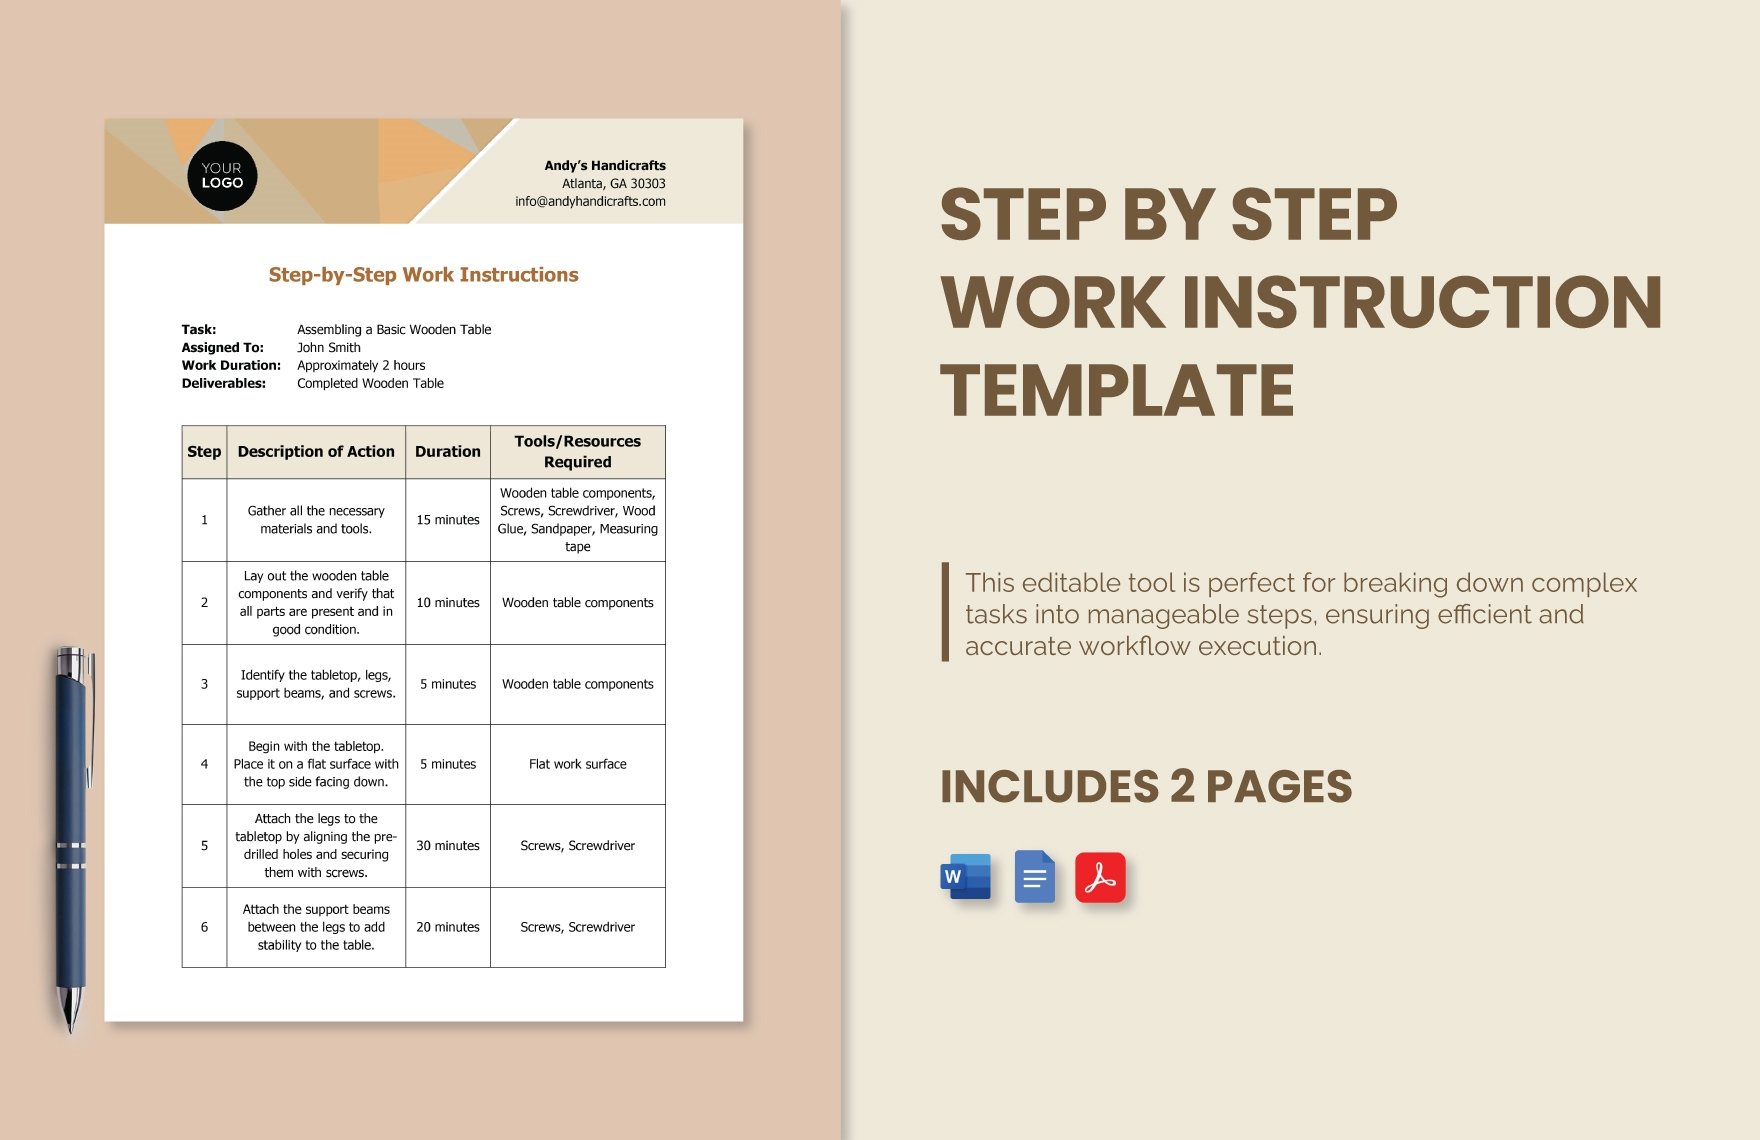 Step by Step Work Instruction Template